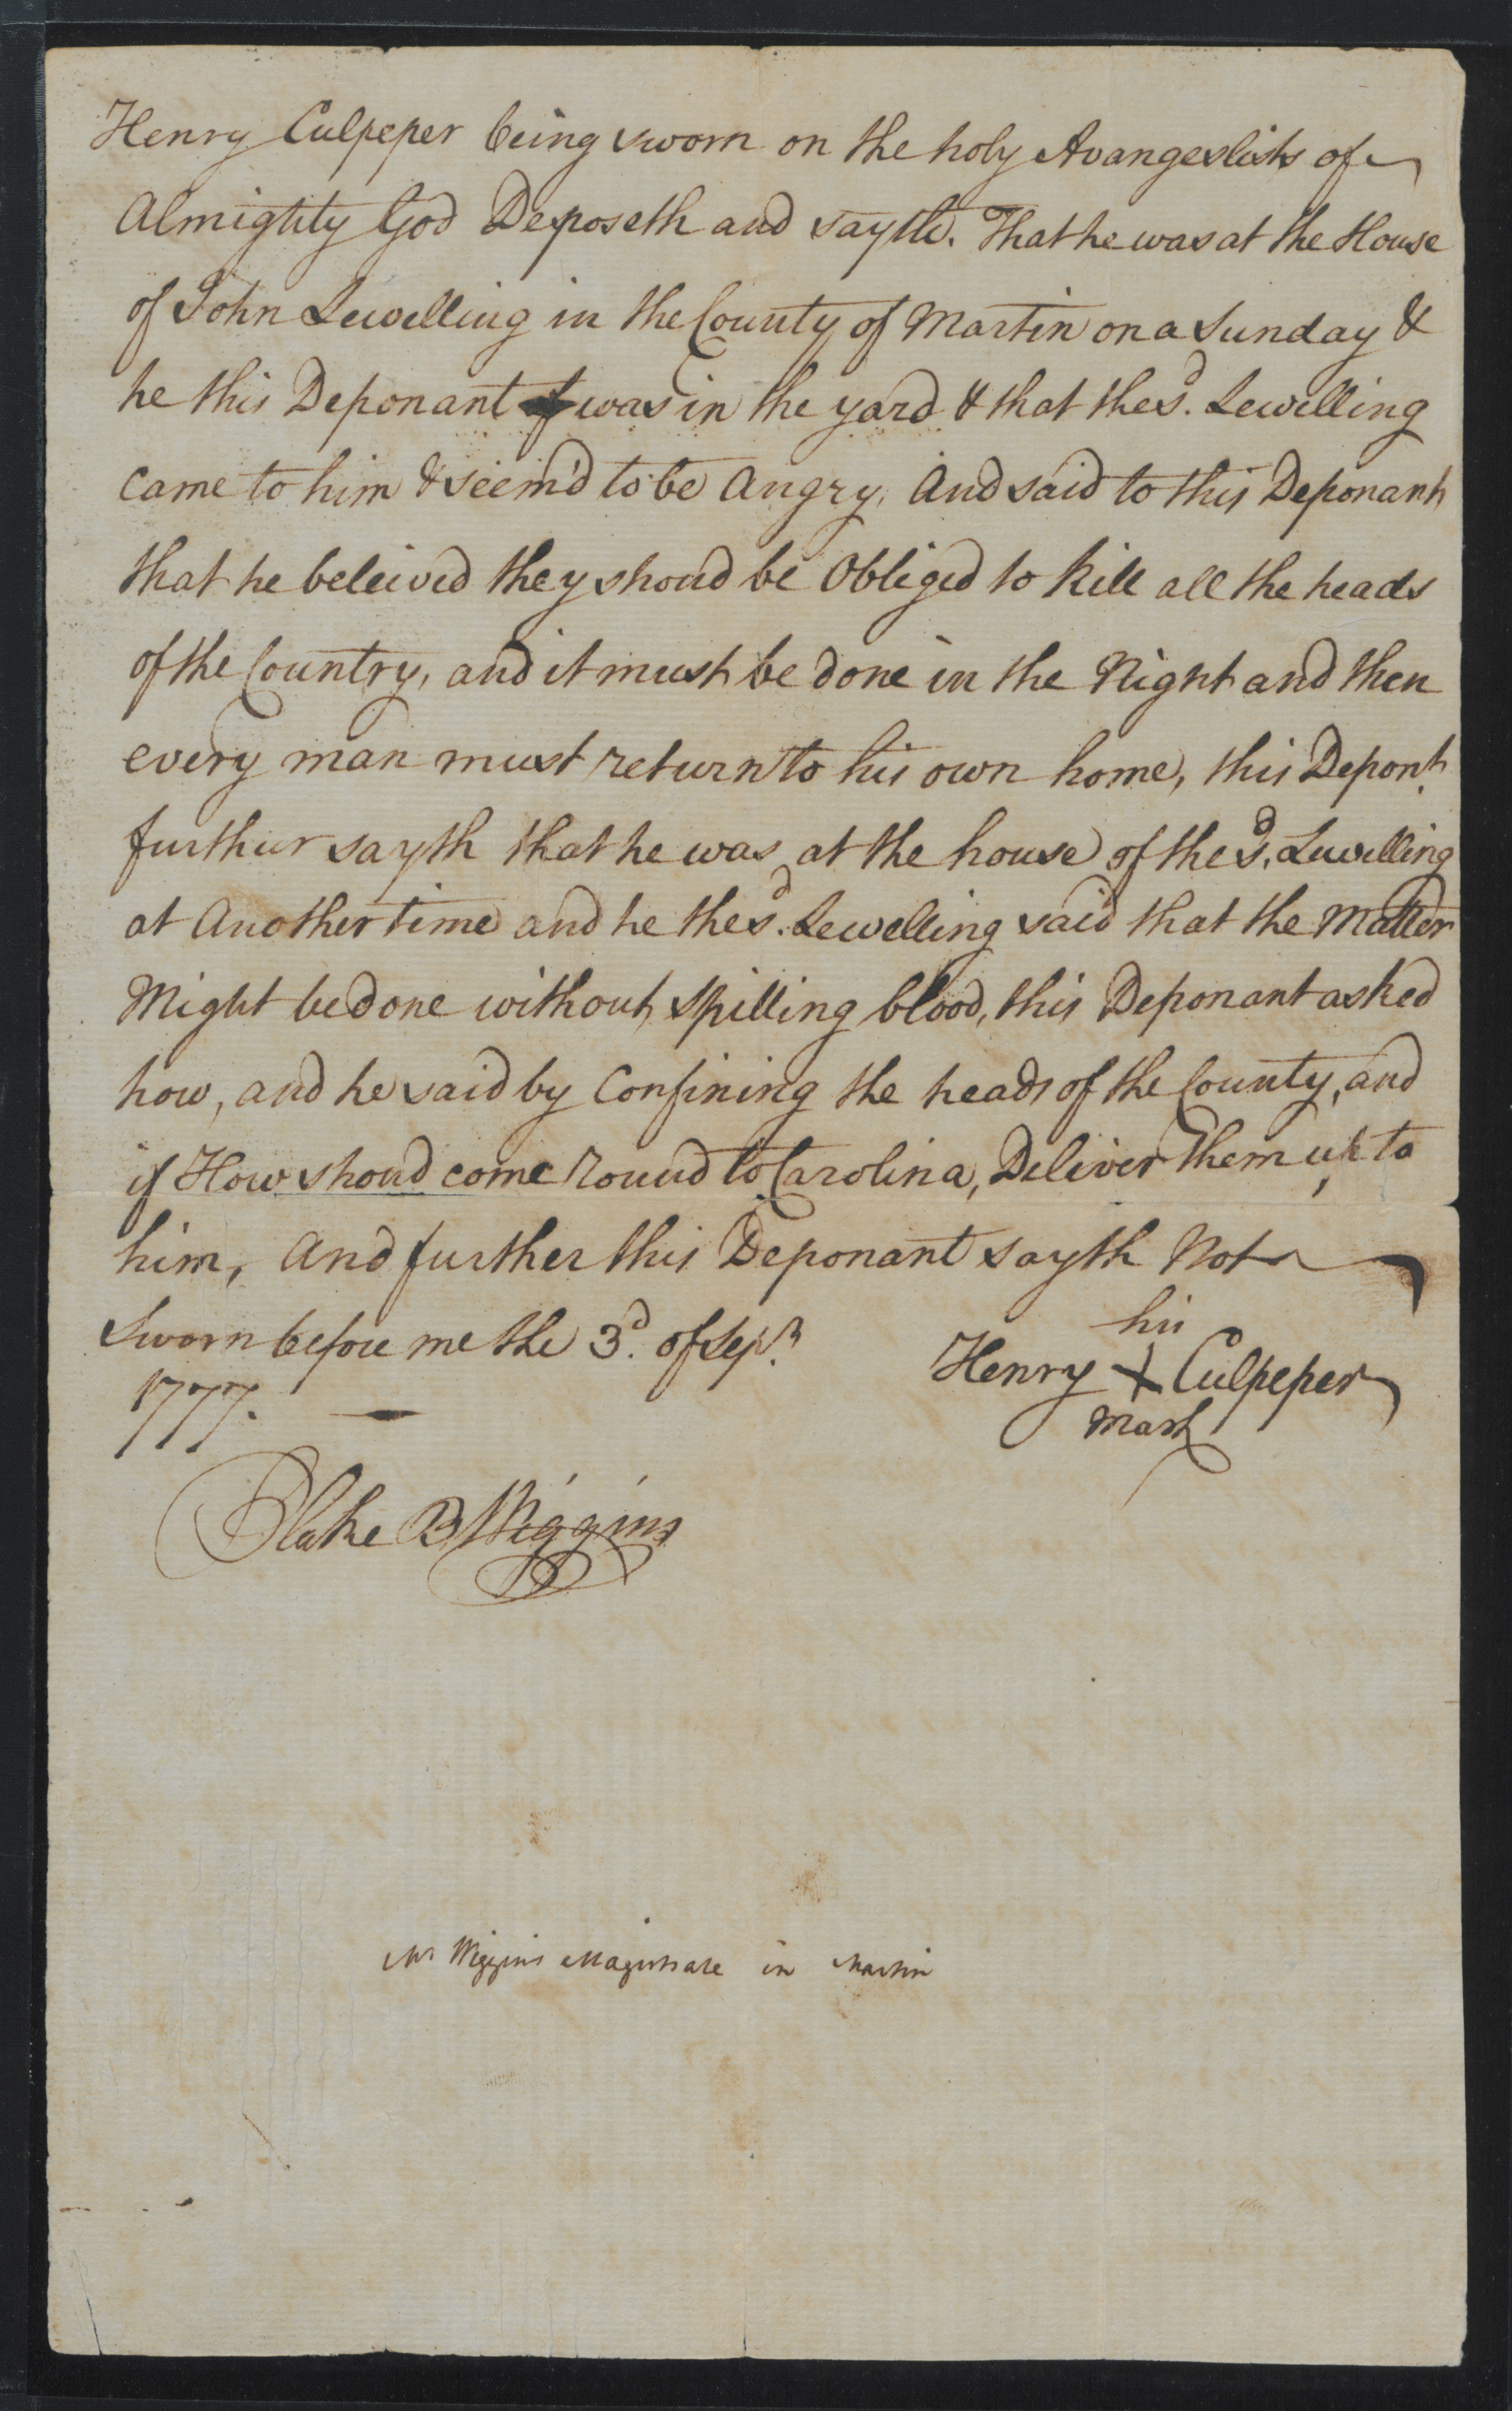 Deposition of Henry Culpeper, 3 September 1777, page 1